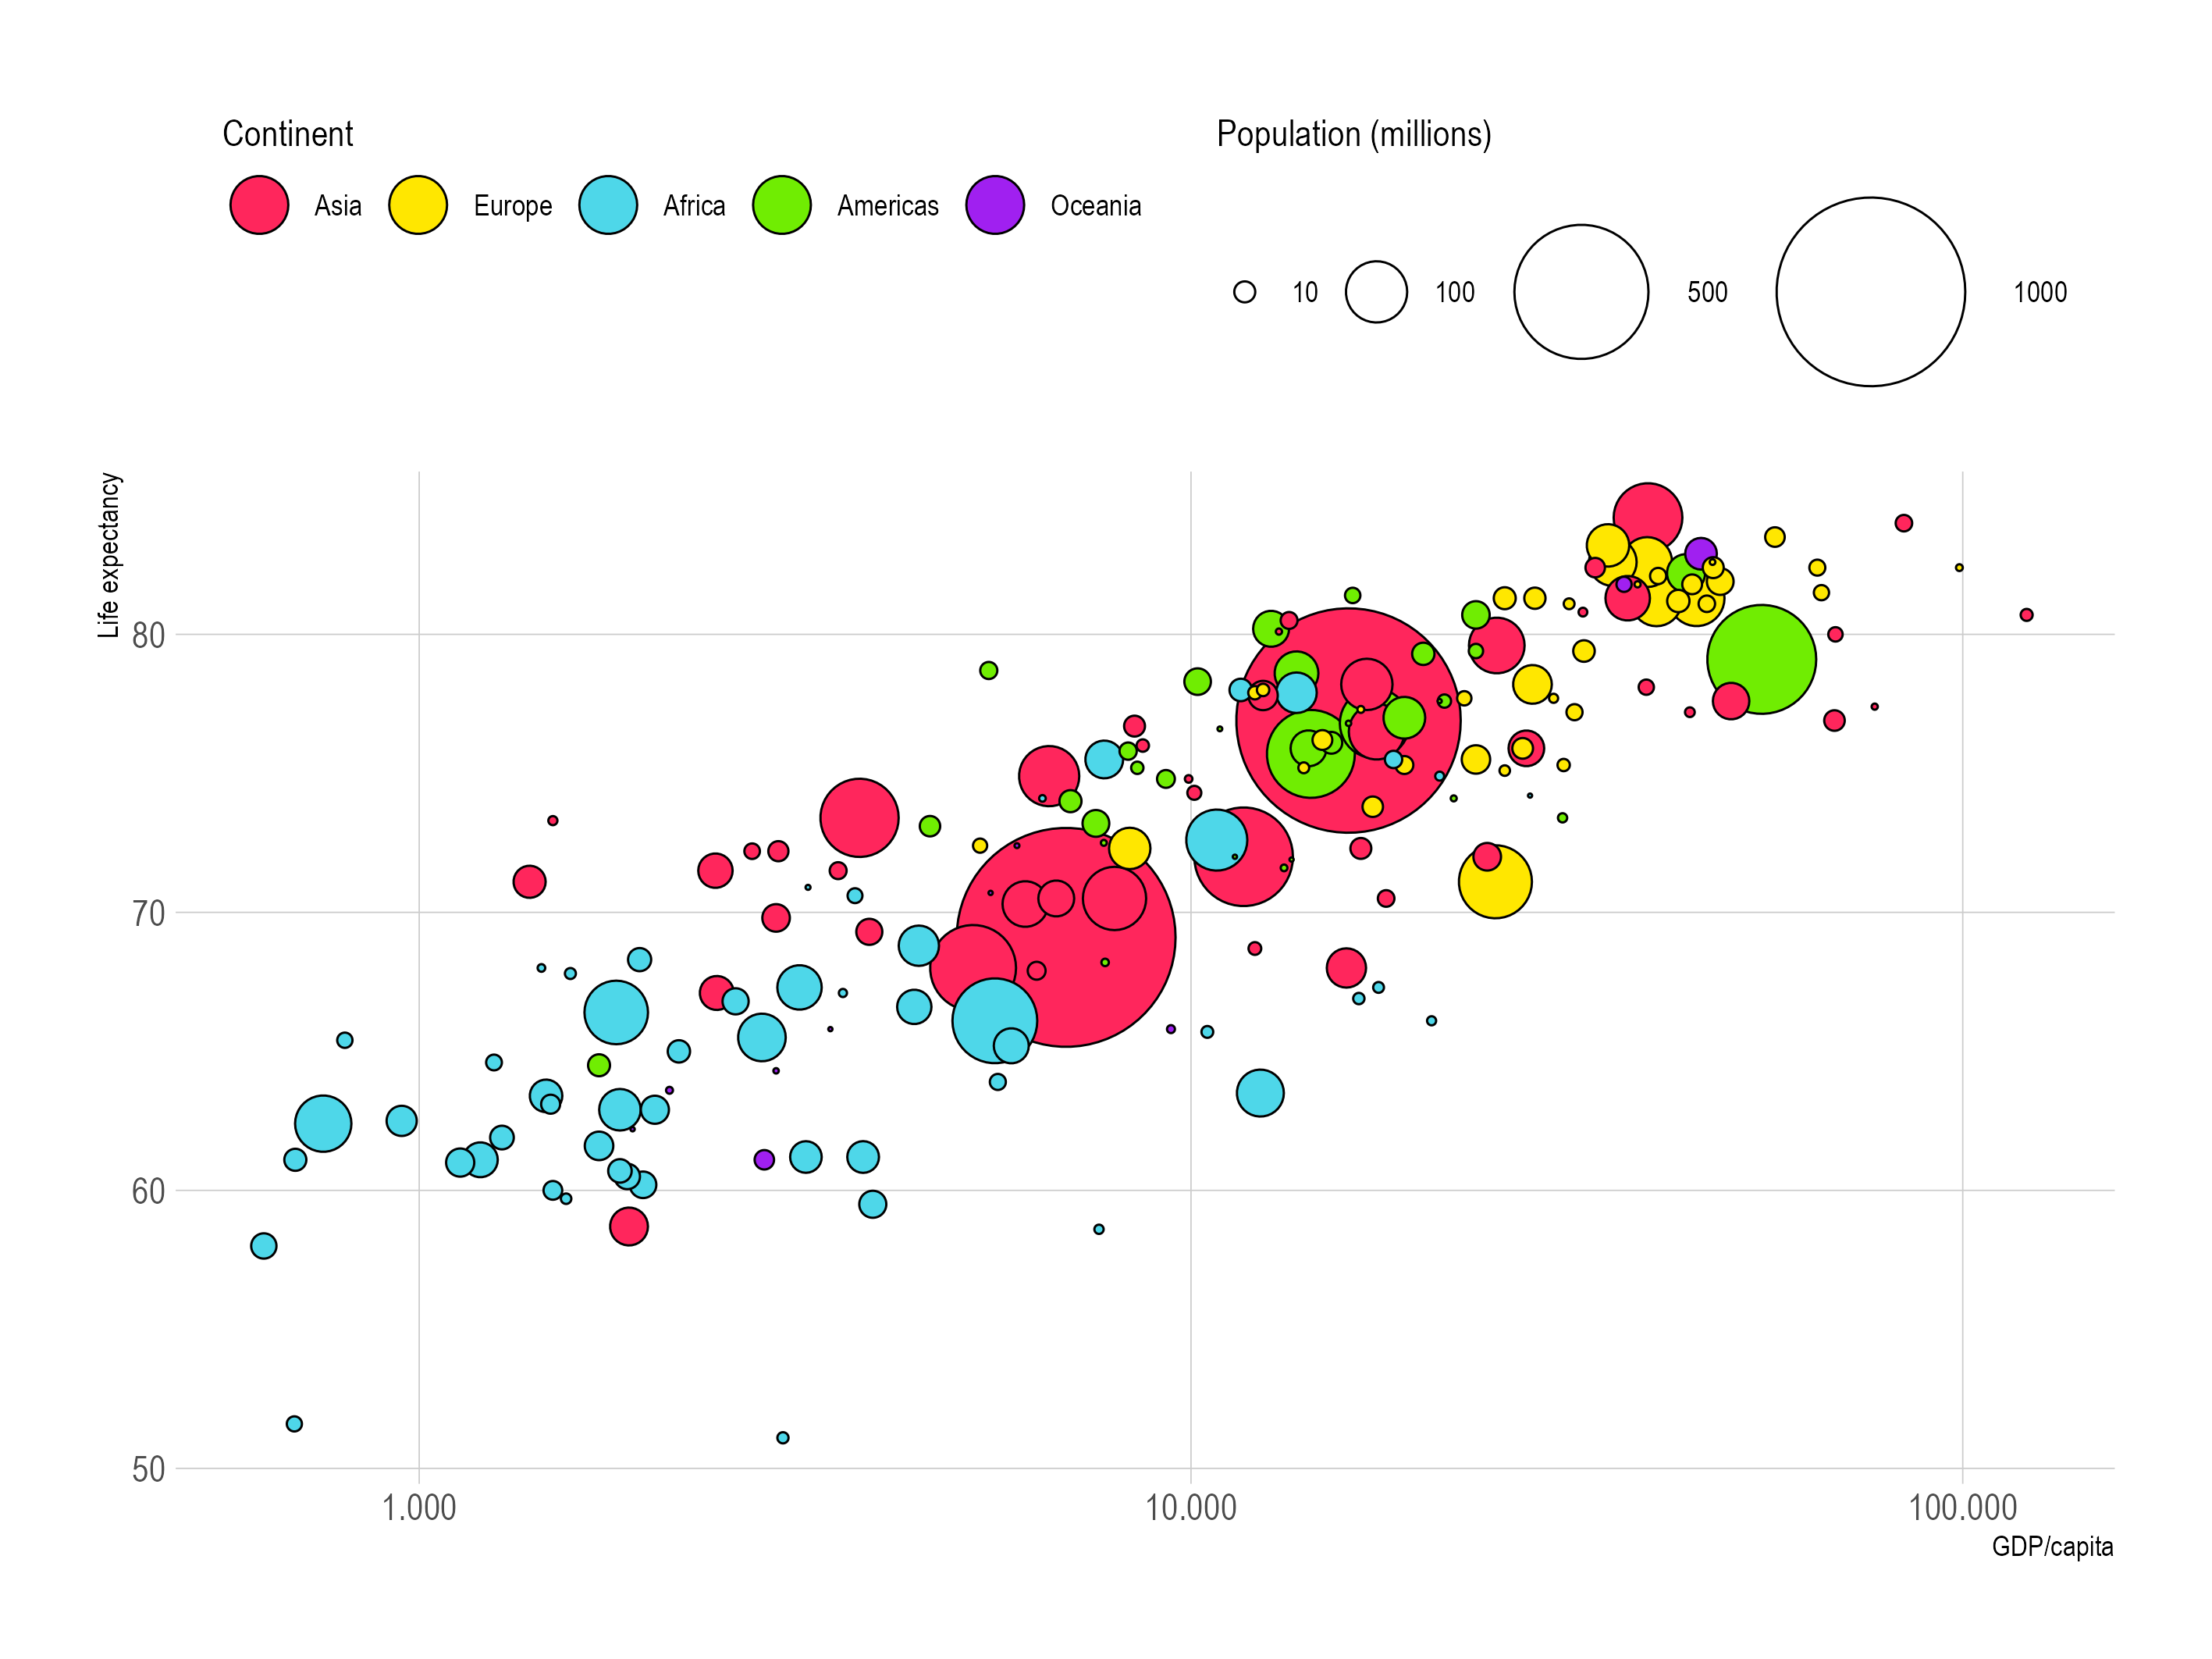 A bubble chart of countries with their life expectancy on the y axis and GDP/capita on the x axis.